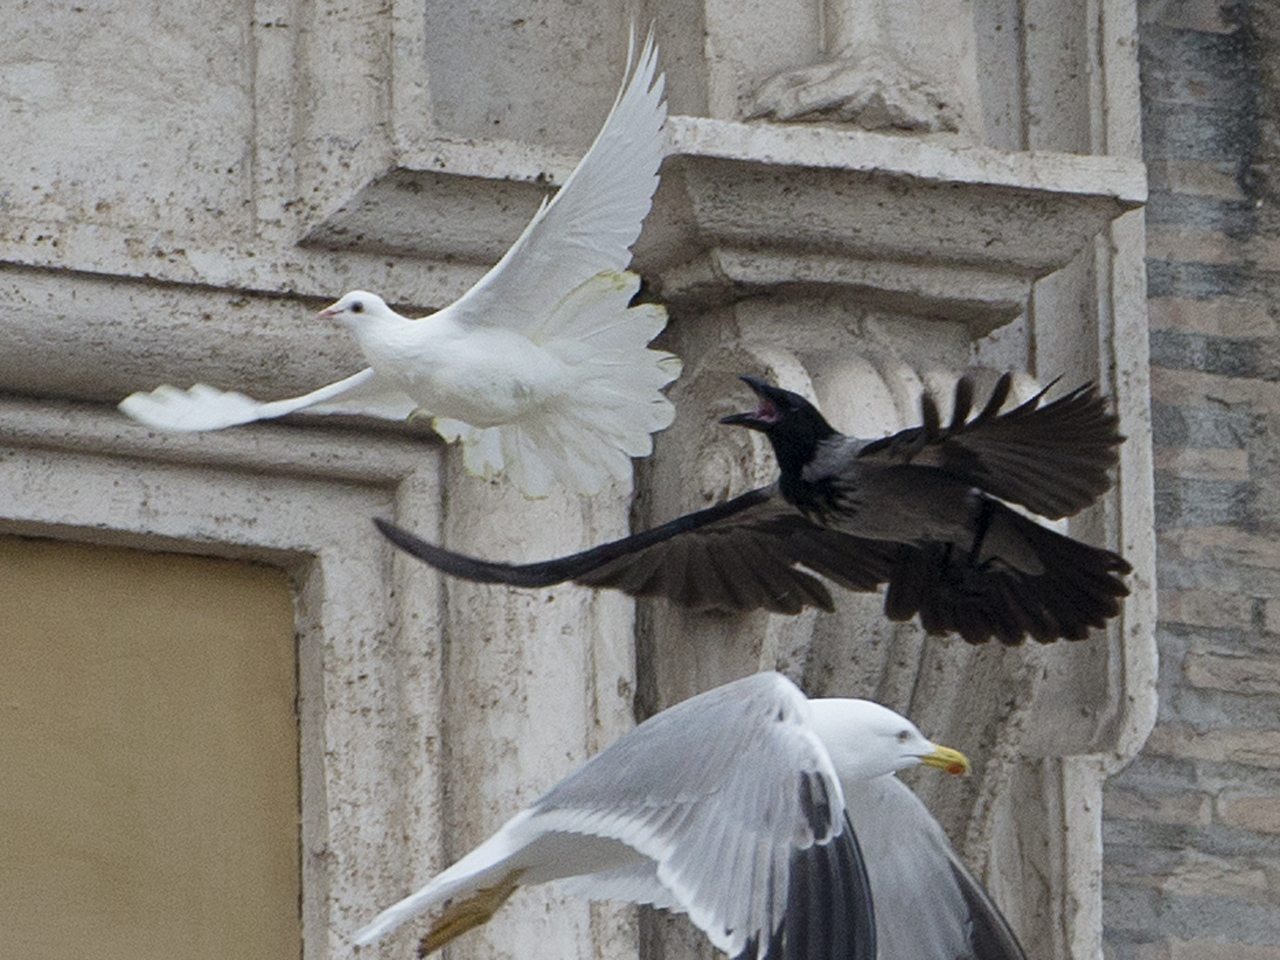 In 2014, Pope Francis released doves in the Vatican to symbolize his hopes for peace in the world. As soon as the doves began to fly, a seagull and a crow swooped down and attacked them in front of everyone. u/medievalistbooknerd